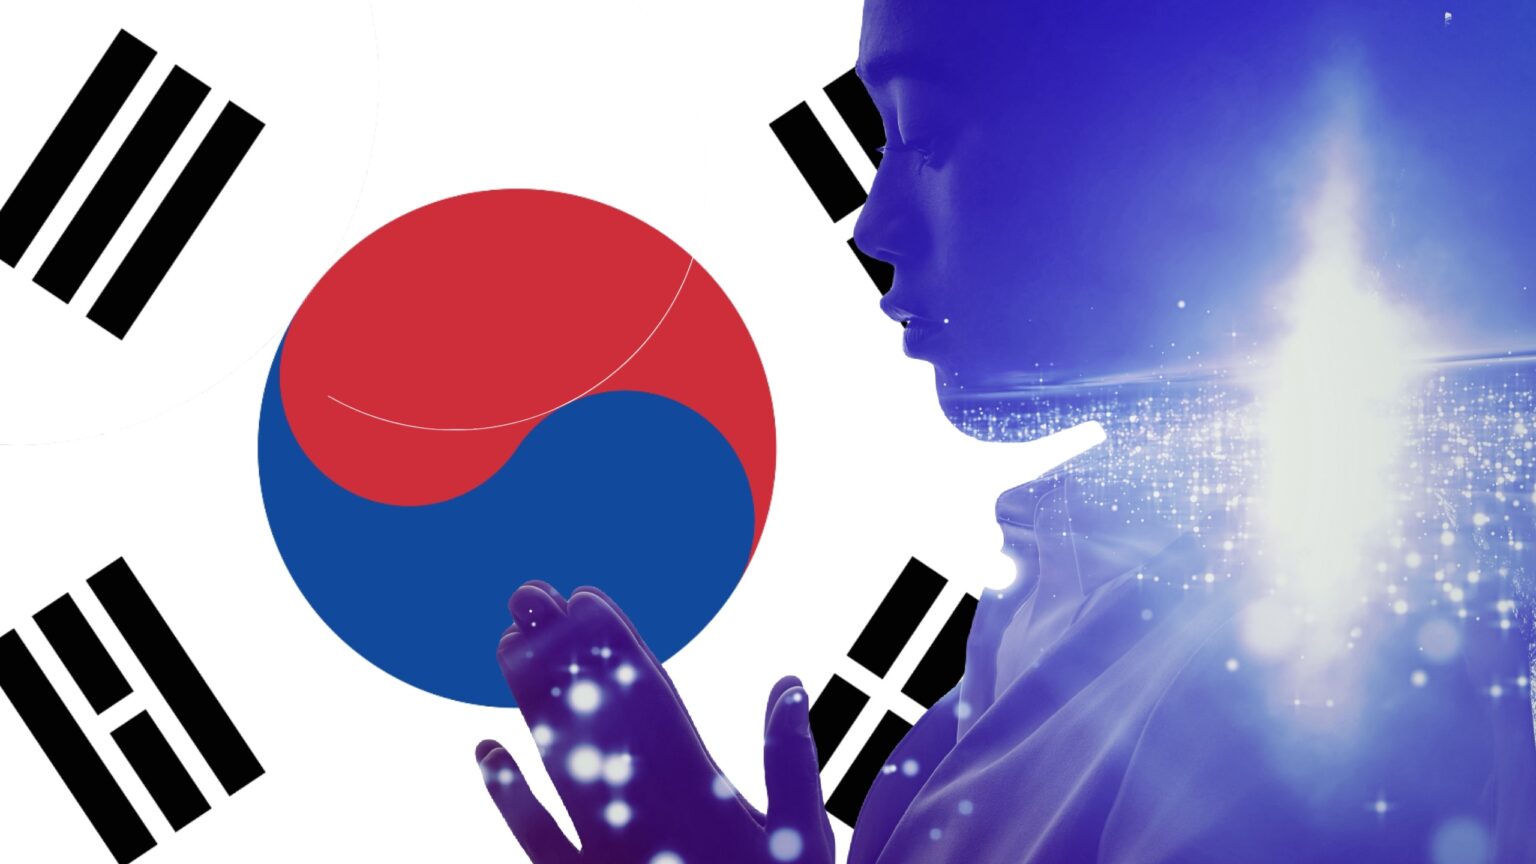 AI Bible Apps Telling Christians How to Pray Cause Divisions in South Korea